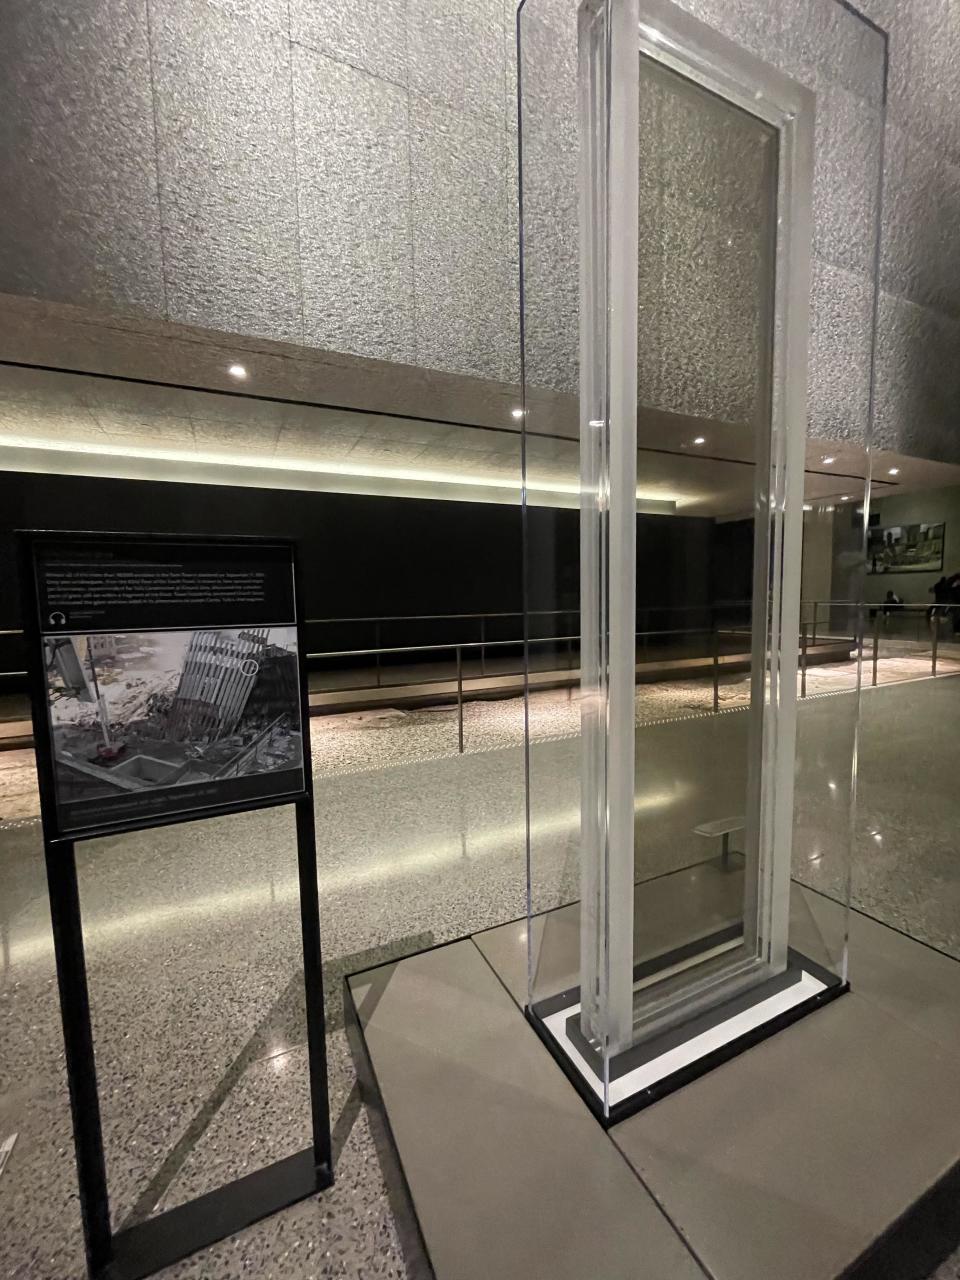 A panel of glass from 9/11 in a museum display